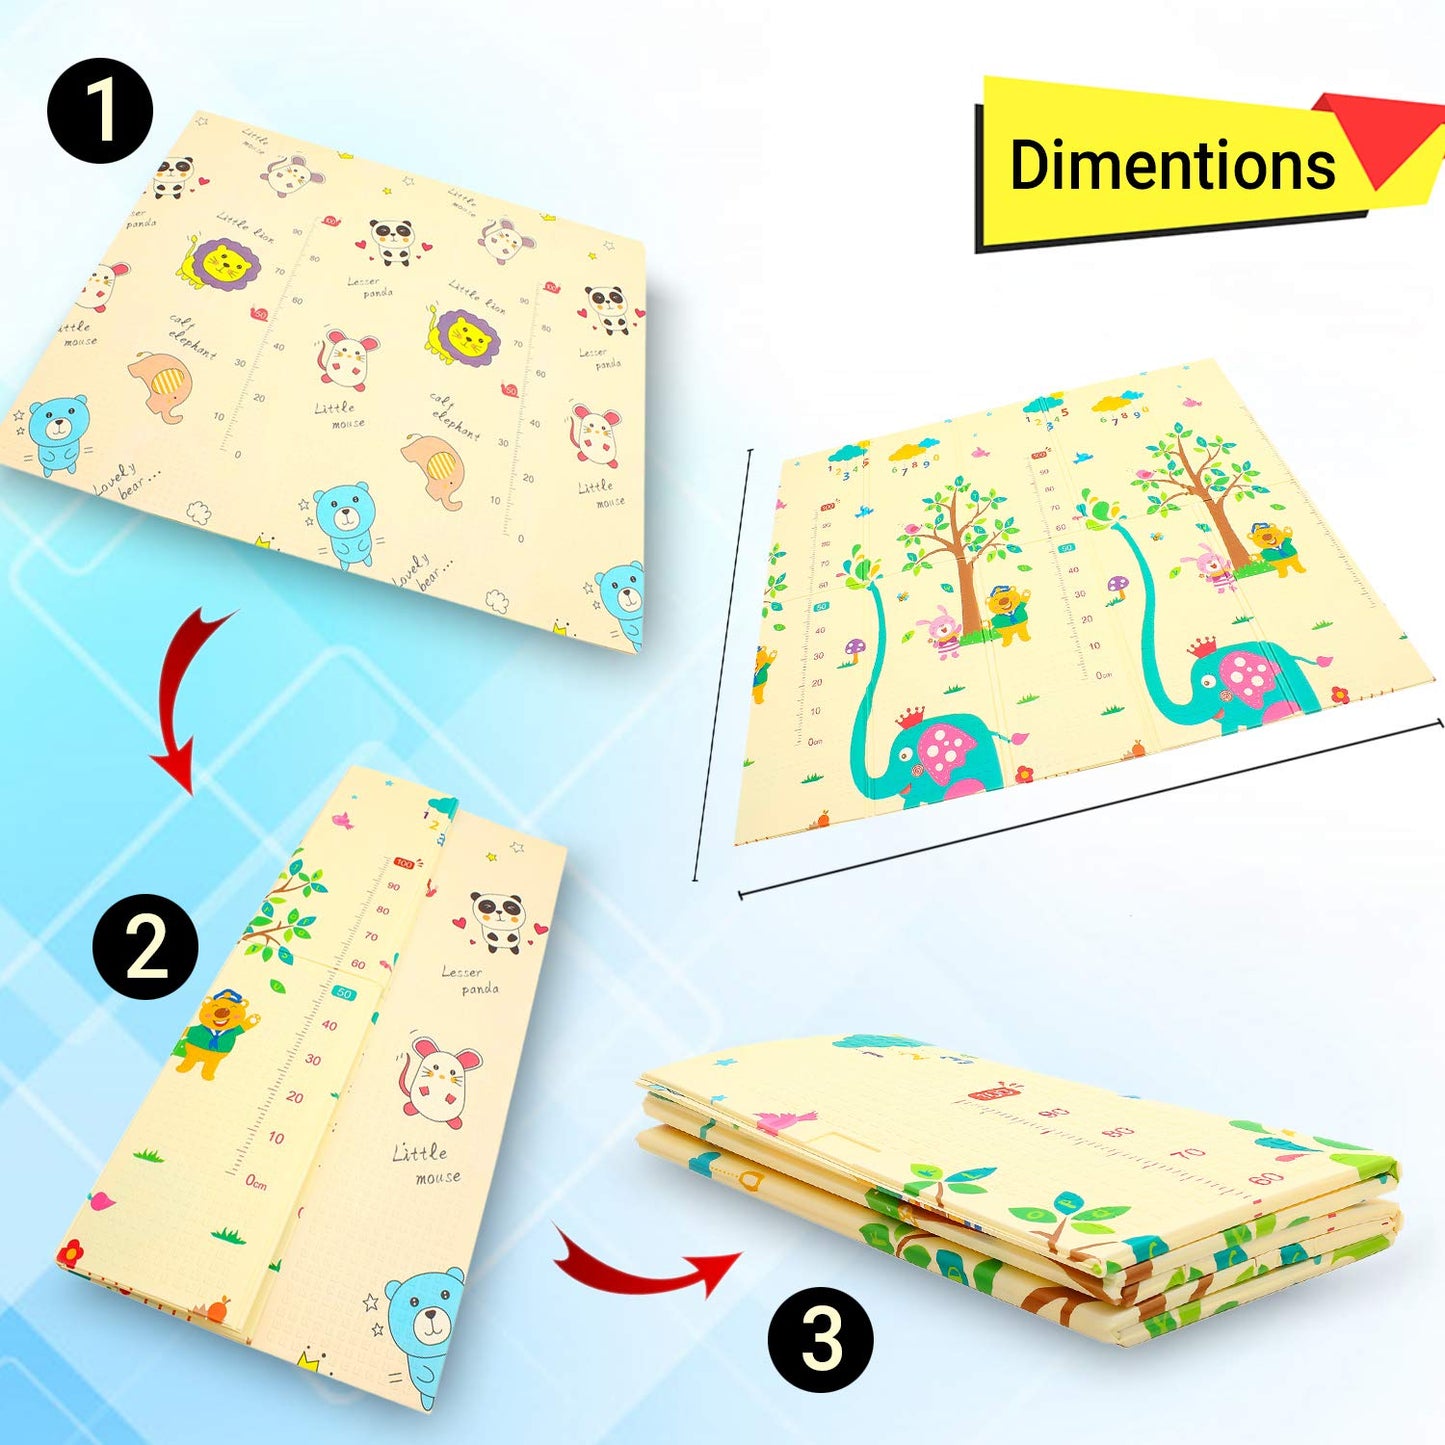 Baybee Foldable Crawling Multi-Purpose Water Proof Play Mat for Babies